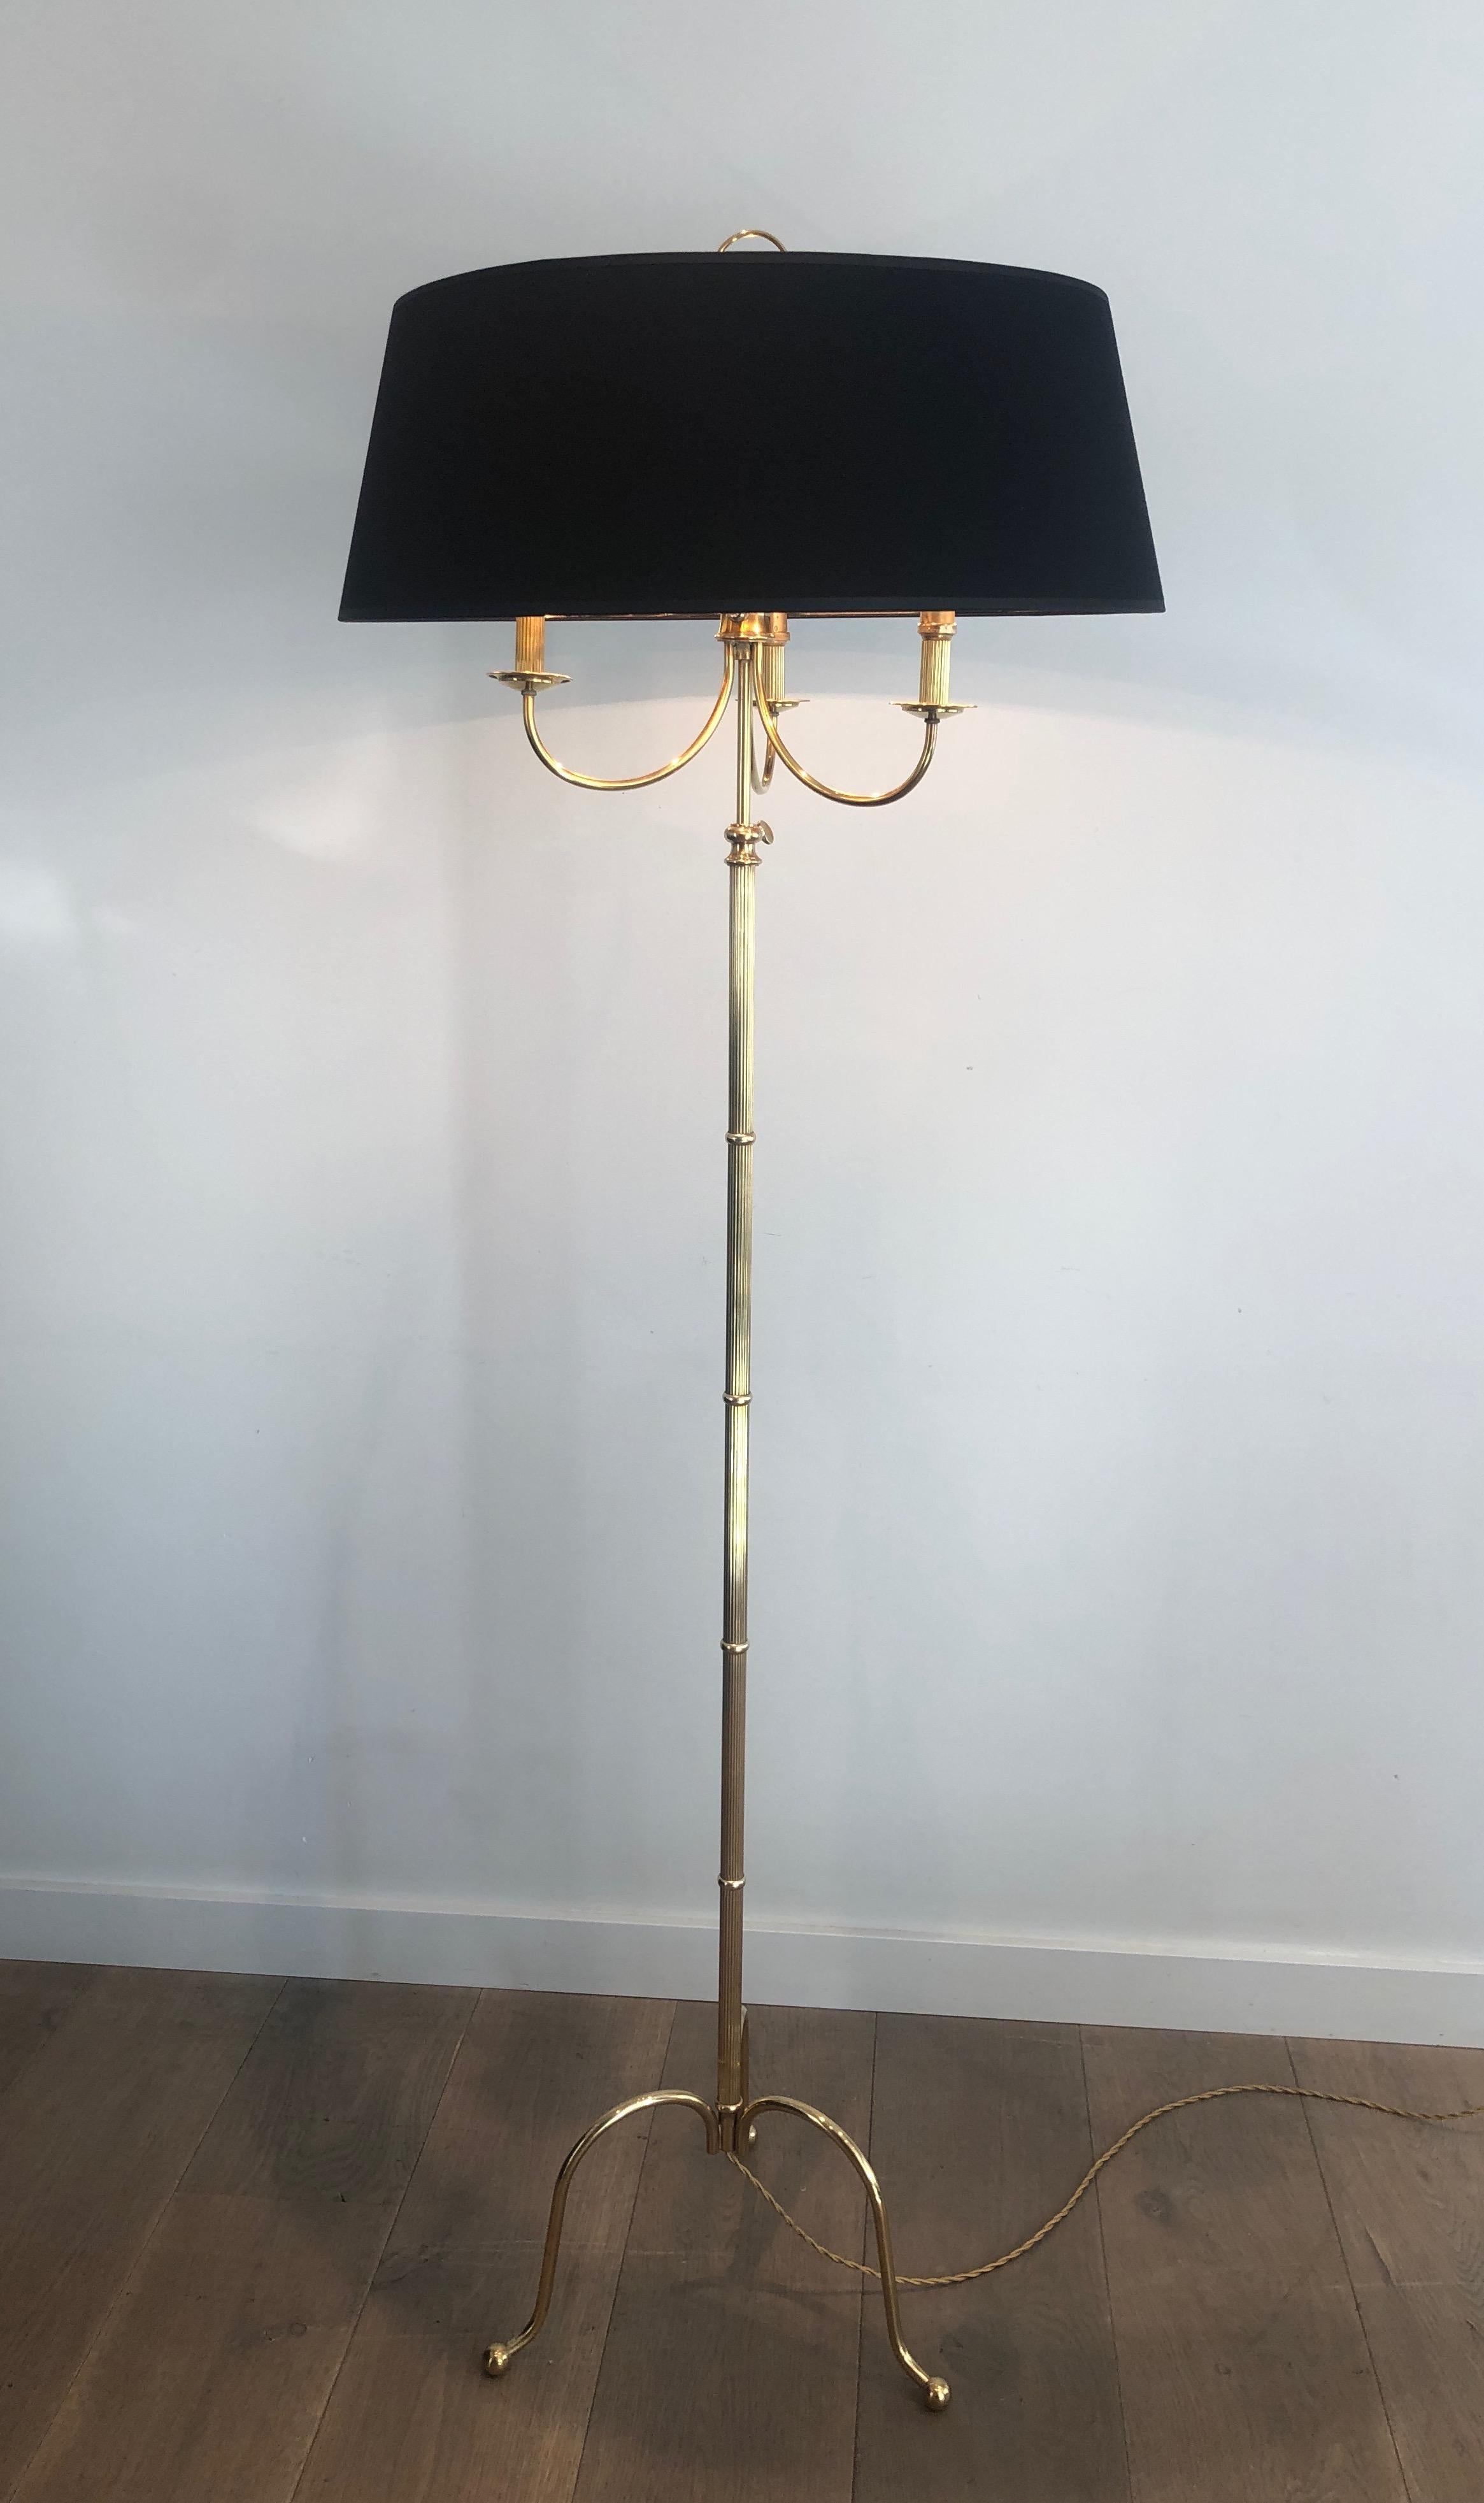 This neoclassical style tripode floor lamp is made of brass. It has 3 arms and is adjustable in height. This is a French work by famous designer Maison Jansen. Circa 1940.